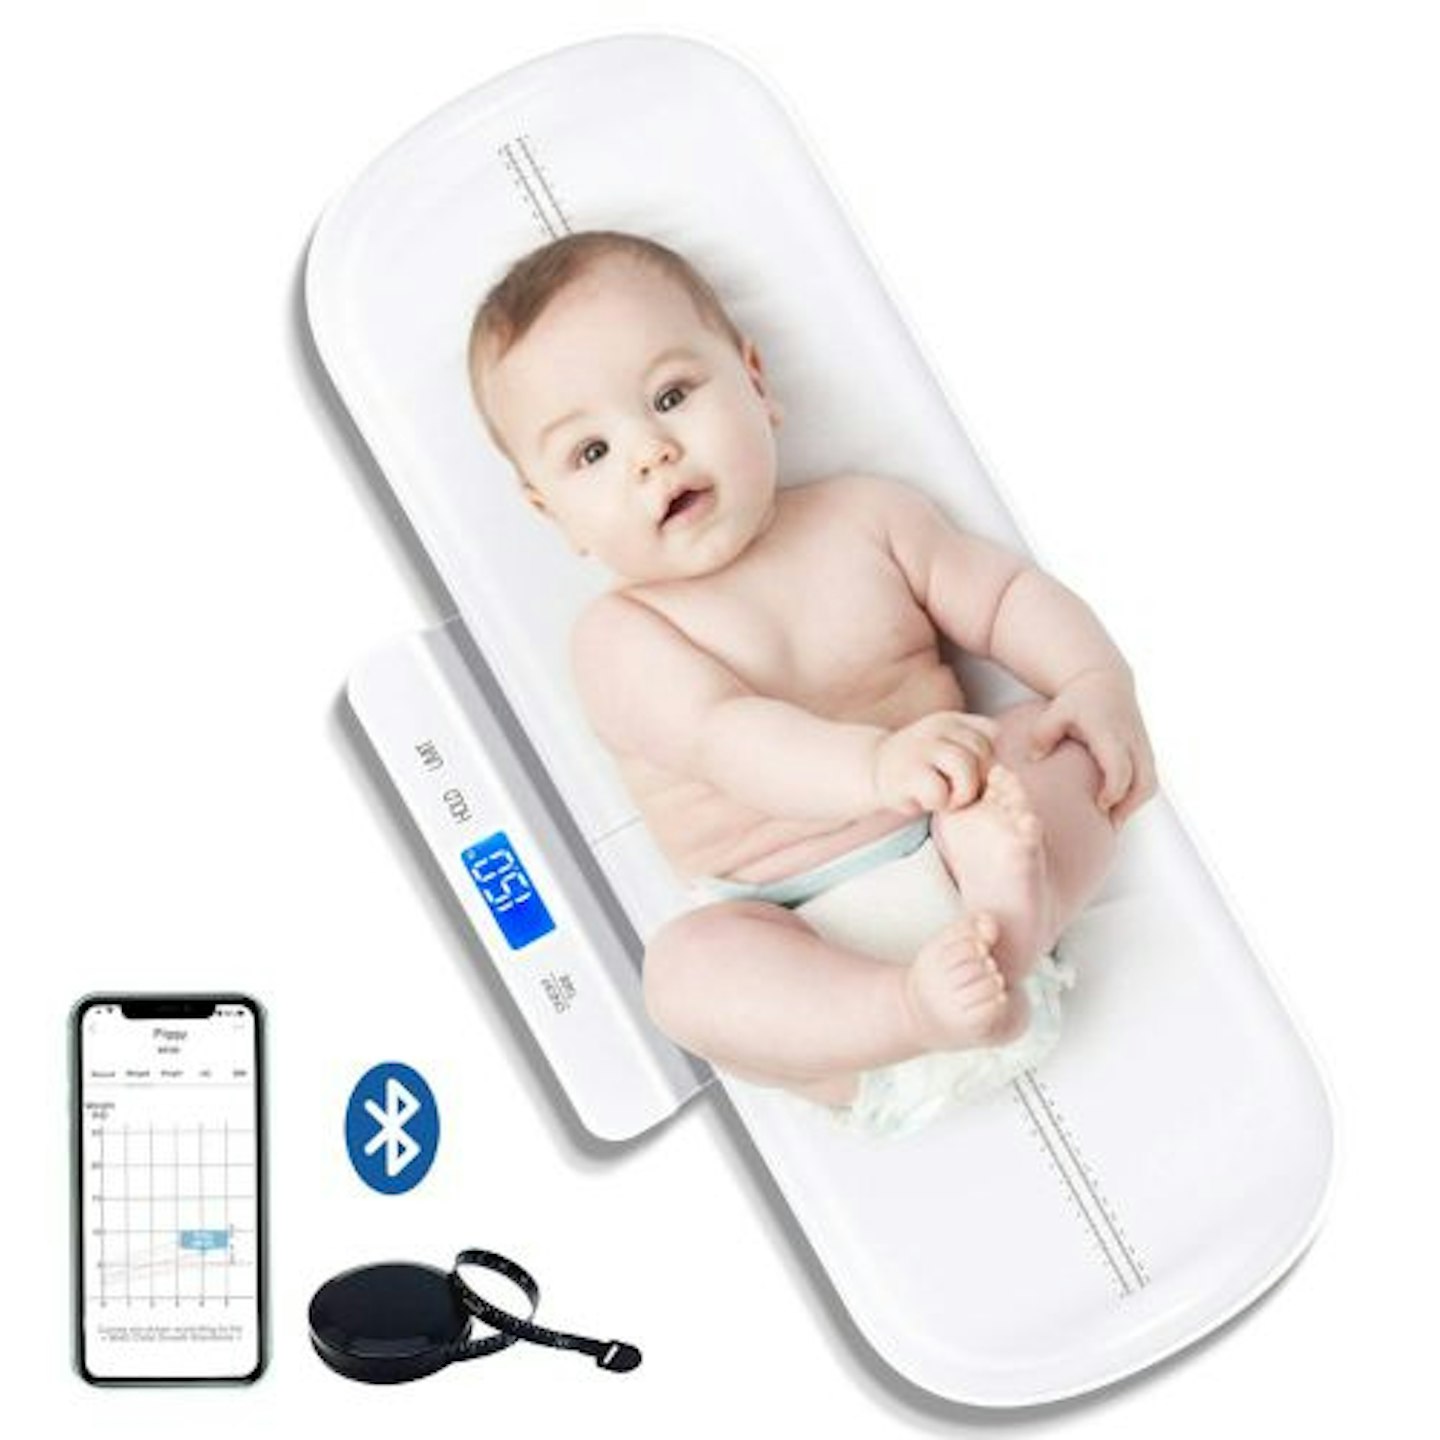  Simshine Digital Baby Scale Weight All Family